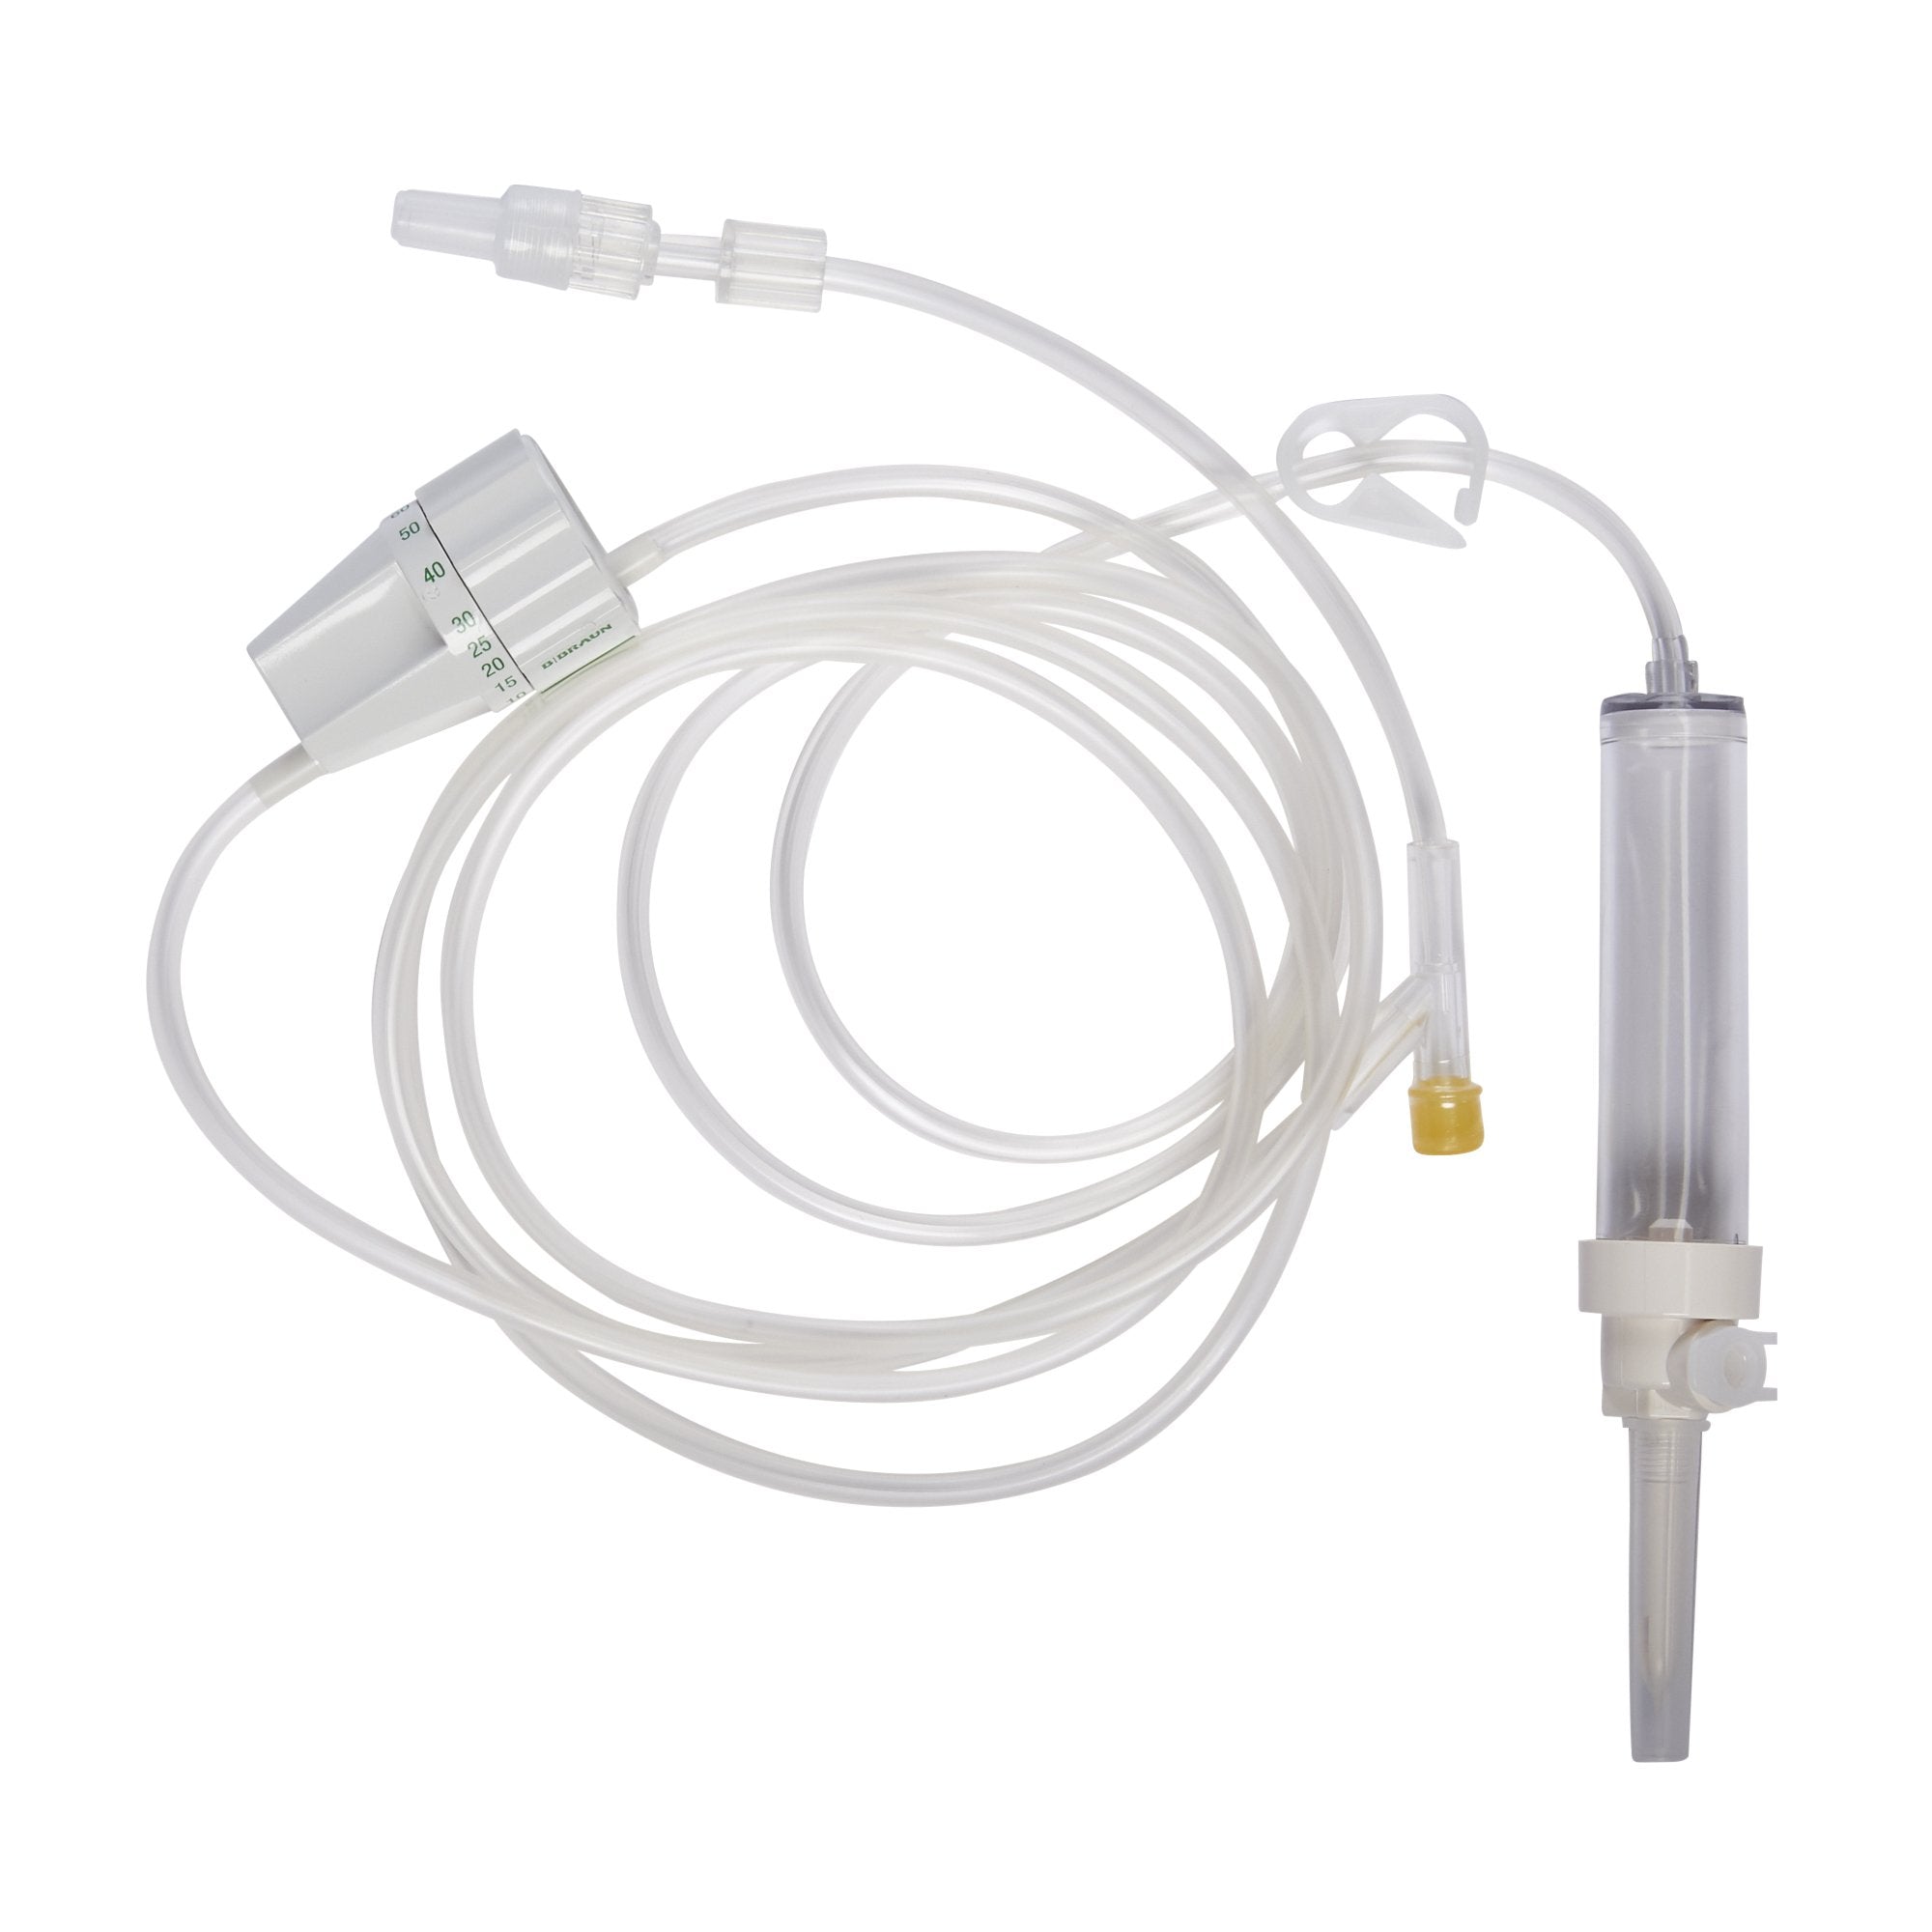 Primary IV Administration Set Rate Flow Gravity 1 Port 20 Drops / mL Drip Rate 15 Micron Filter 84 Inch Tubing Solution